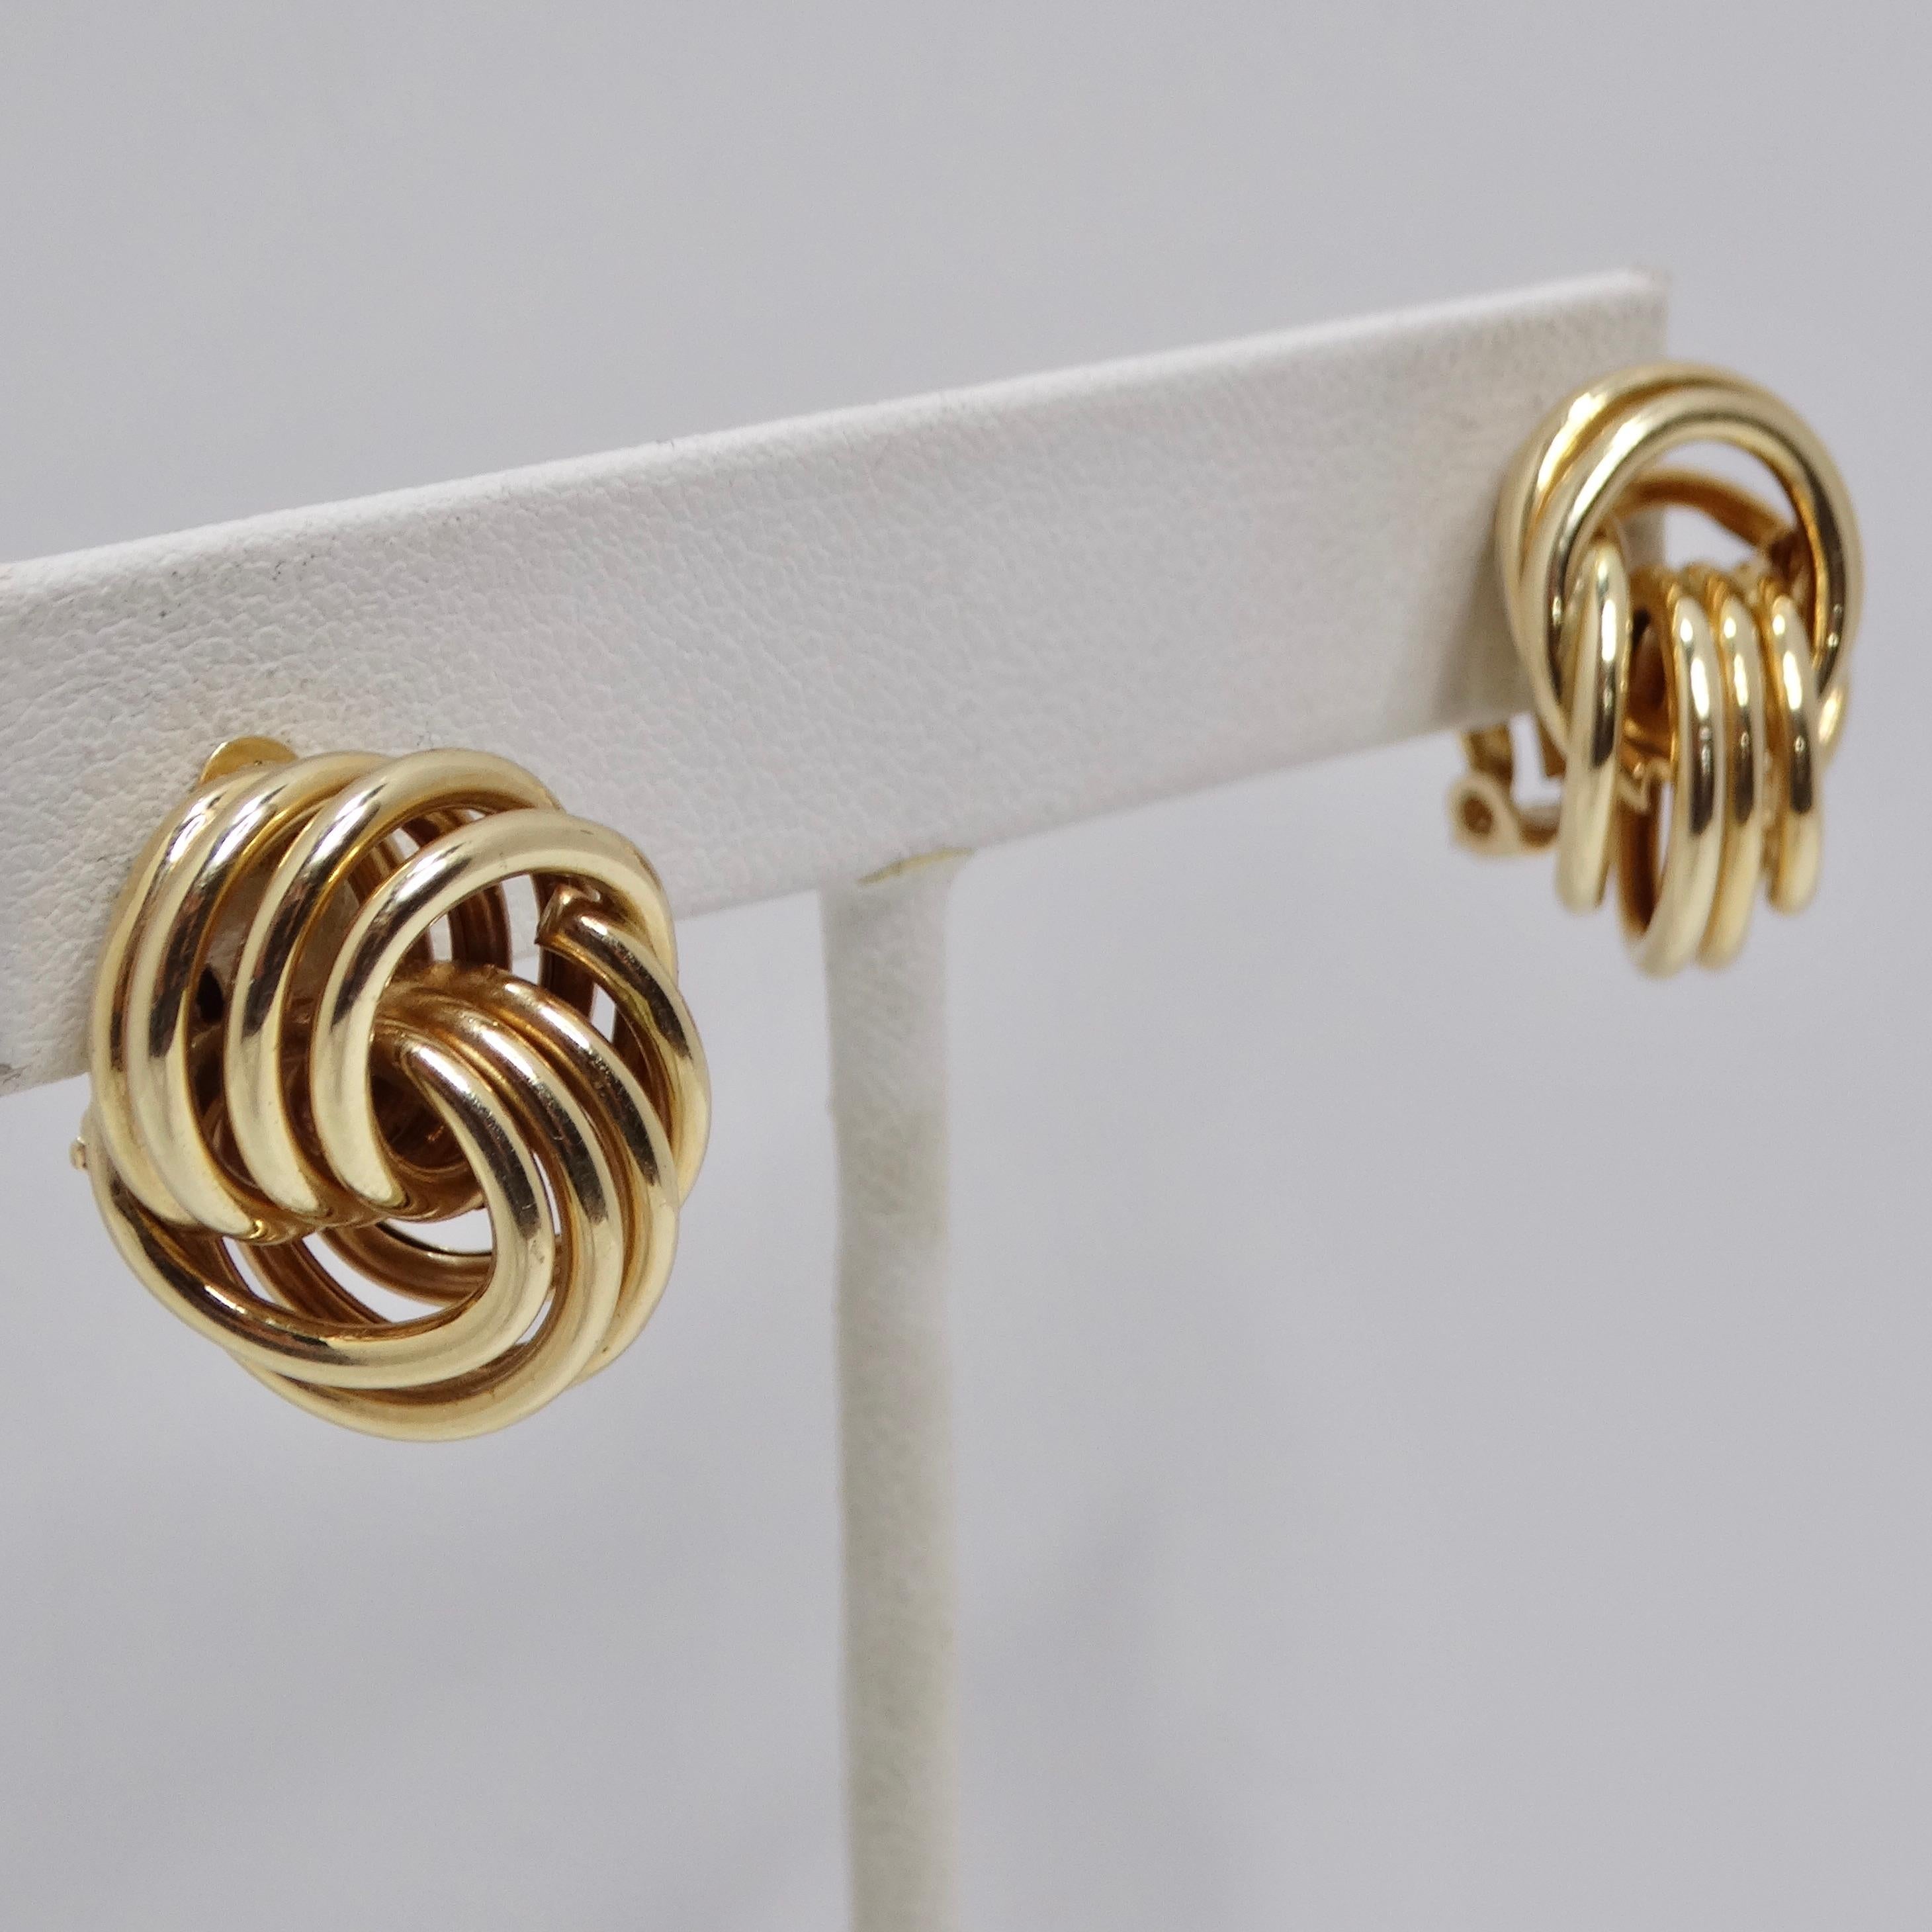 1970s Tiffany Inspired 14K Gold Clip On Earrings For Sale 3